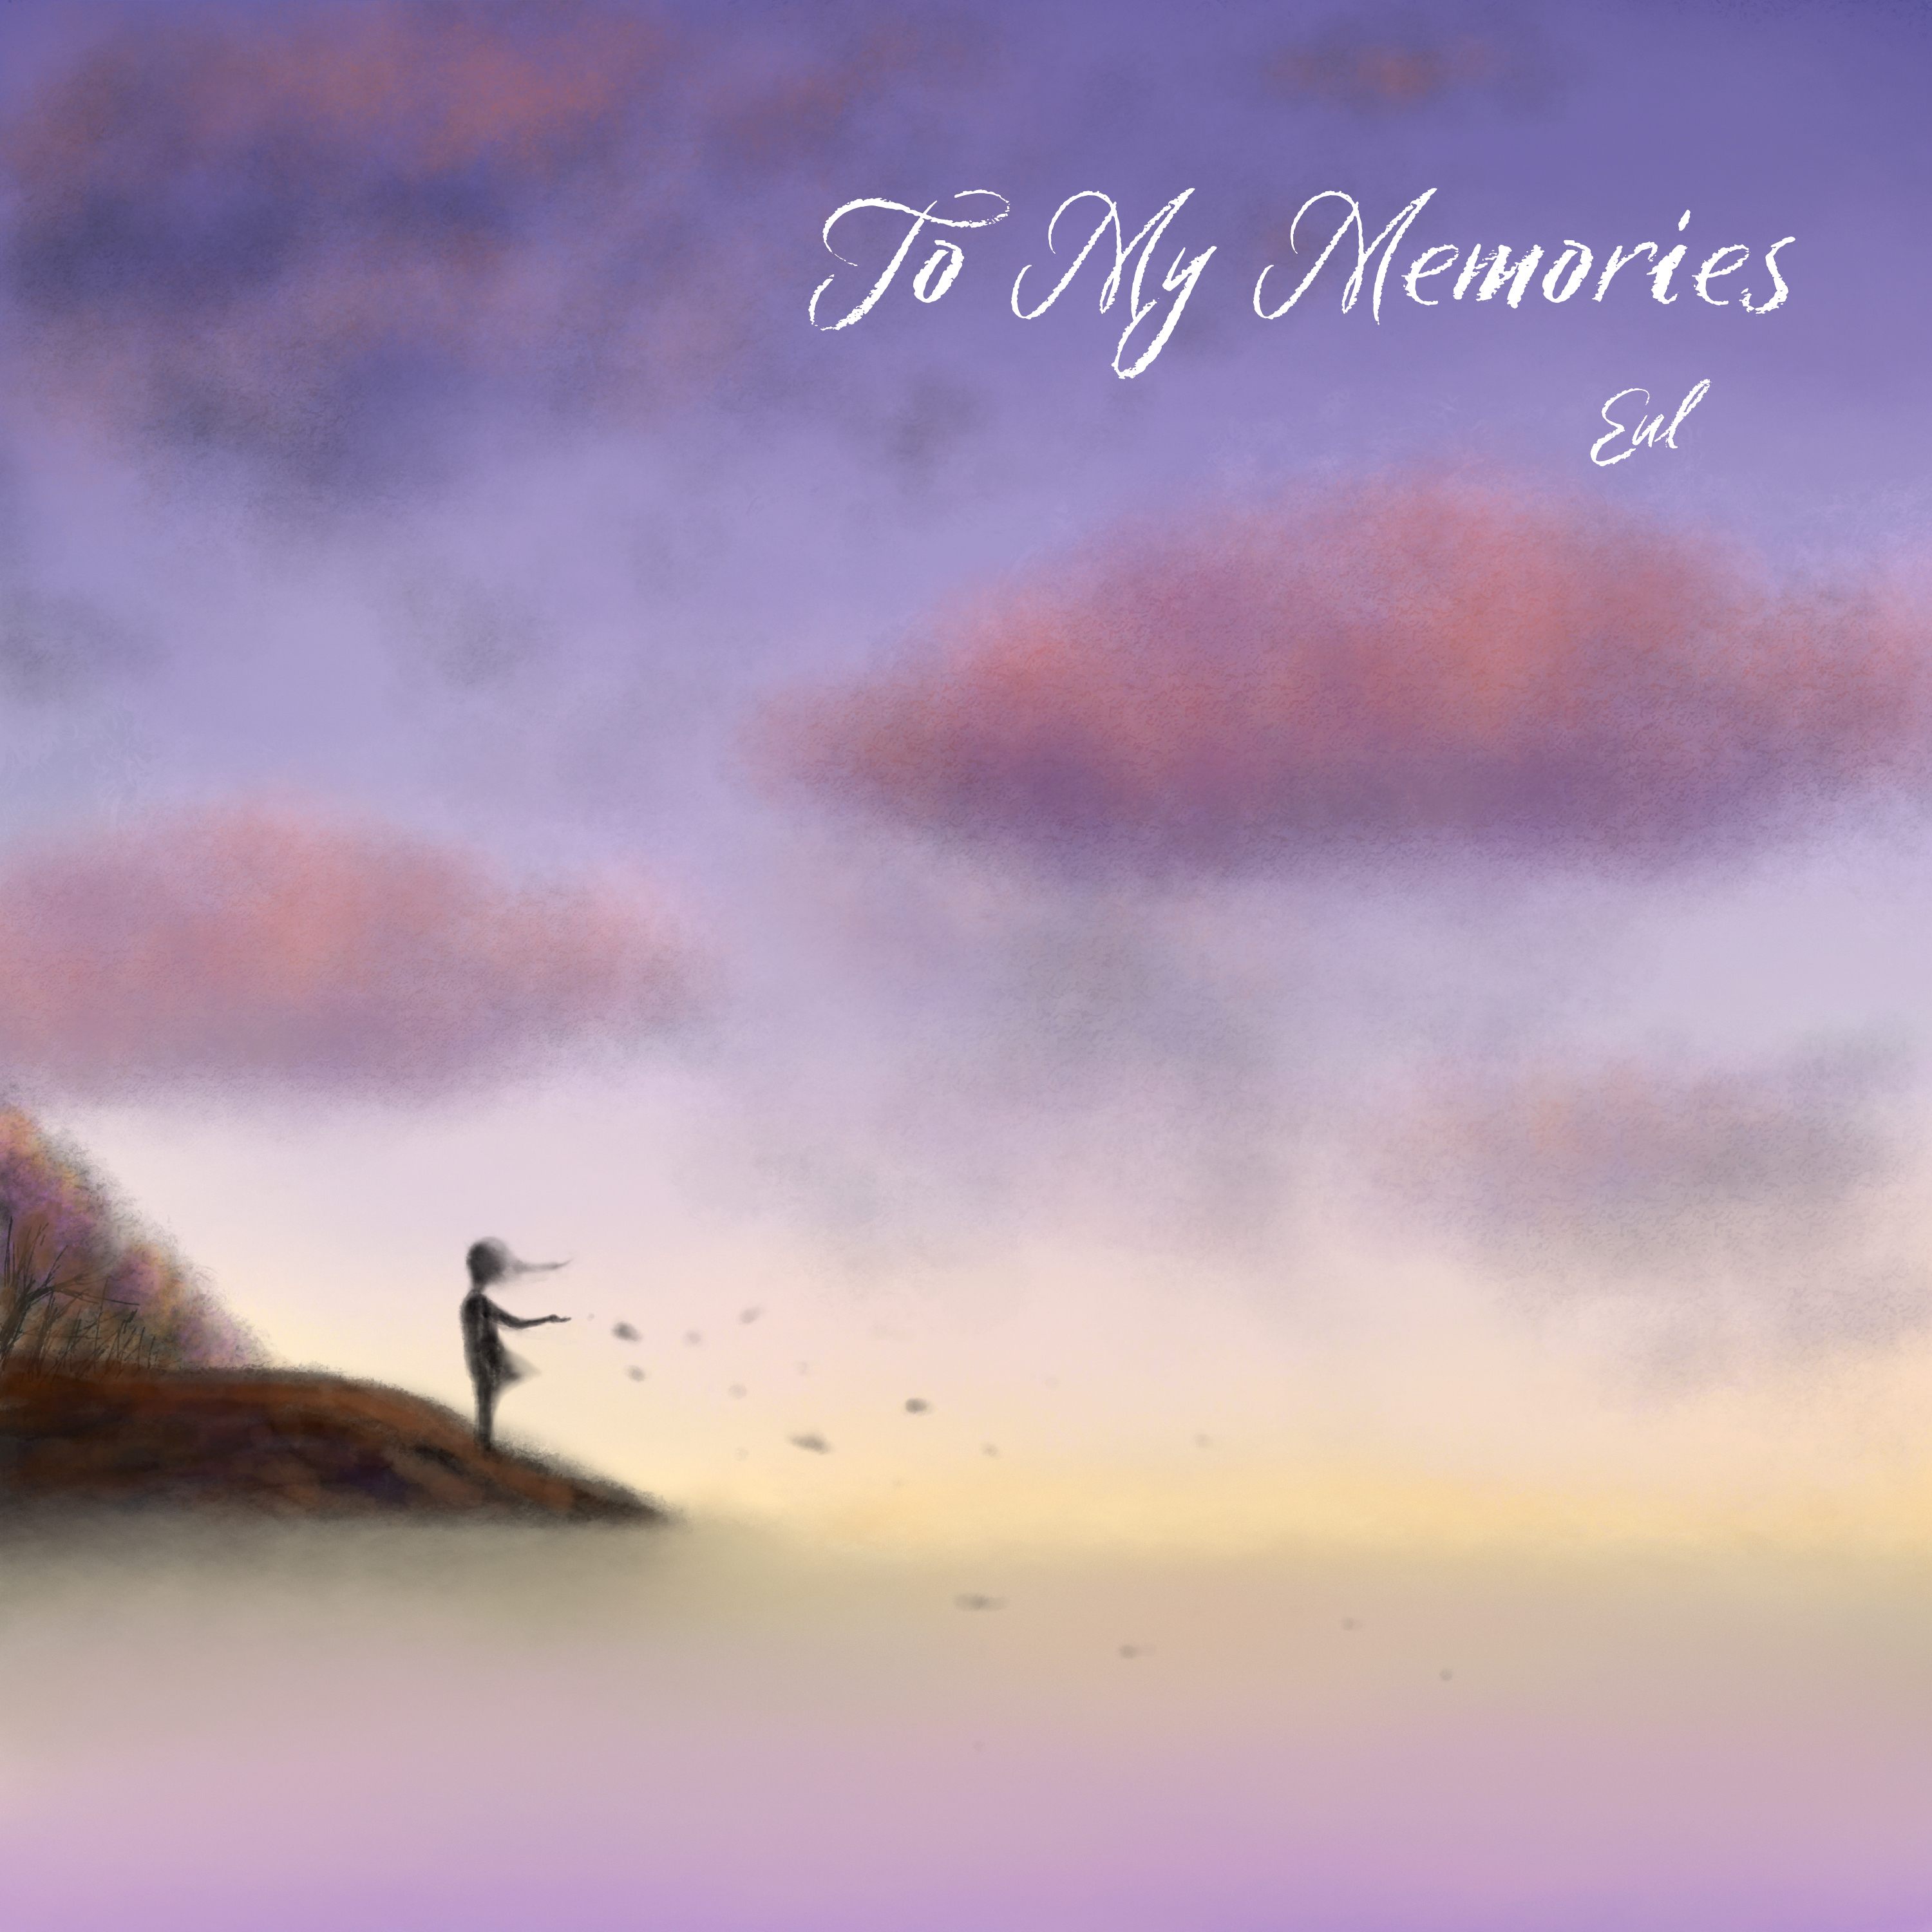 Art for To My Memories by Eul